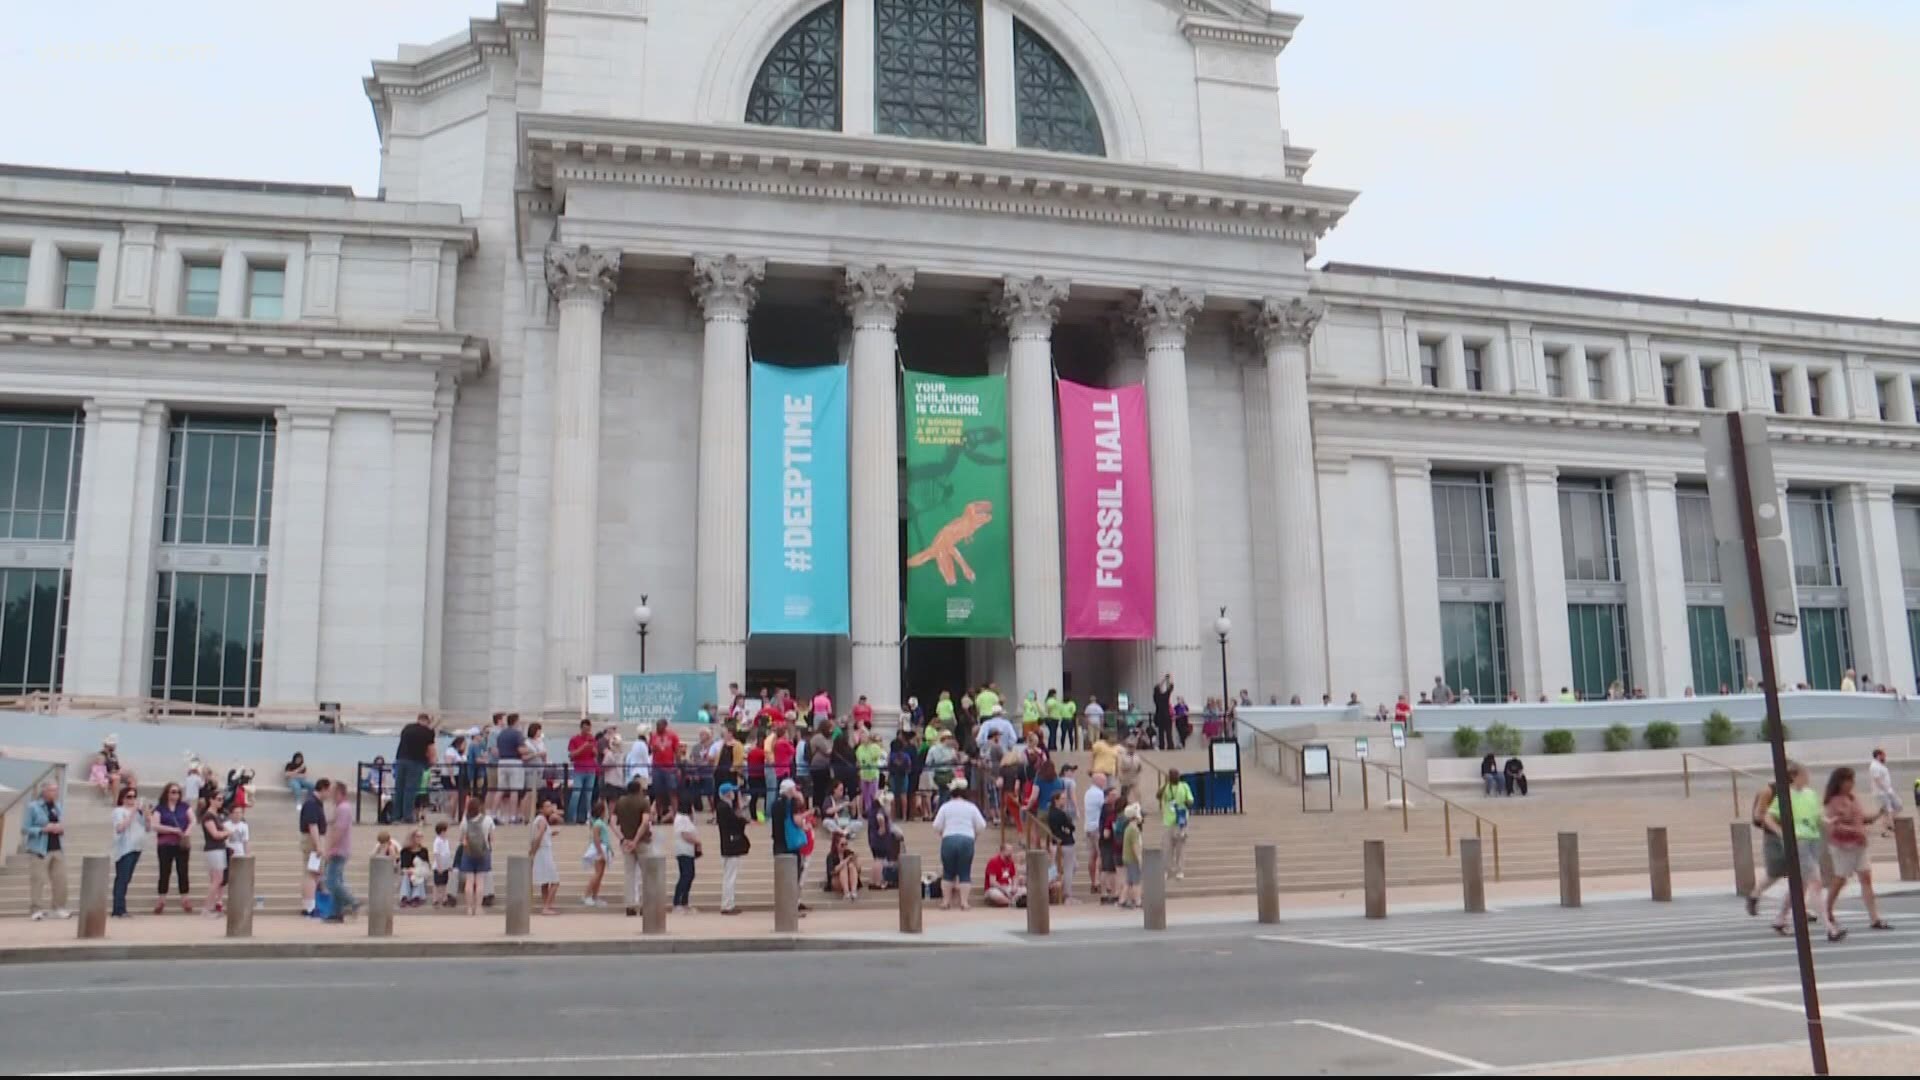 The closure will impact all eight Smithsonian facilities in the D.C. area that had previously reopened to the public.